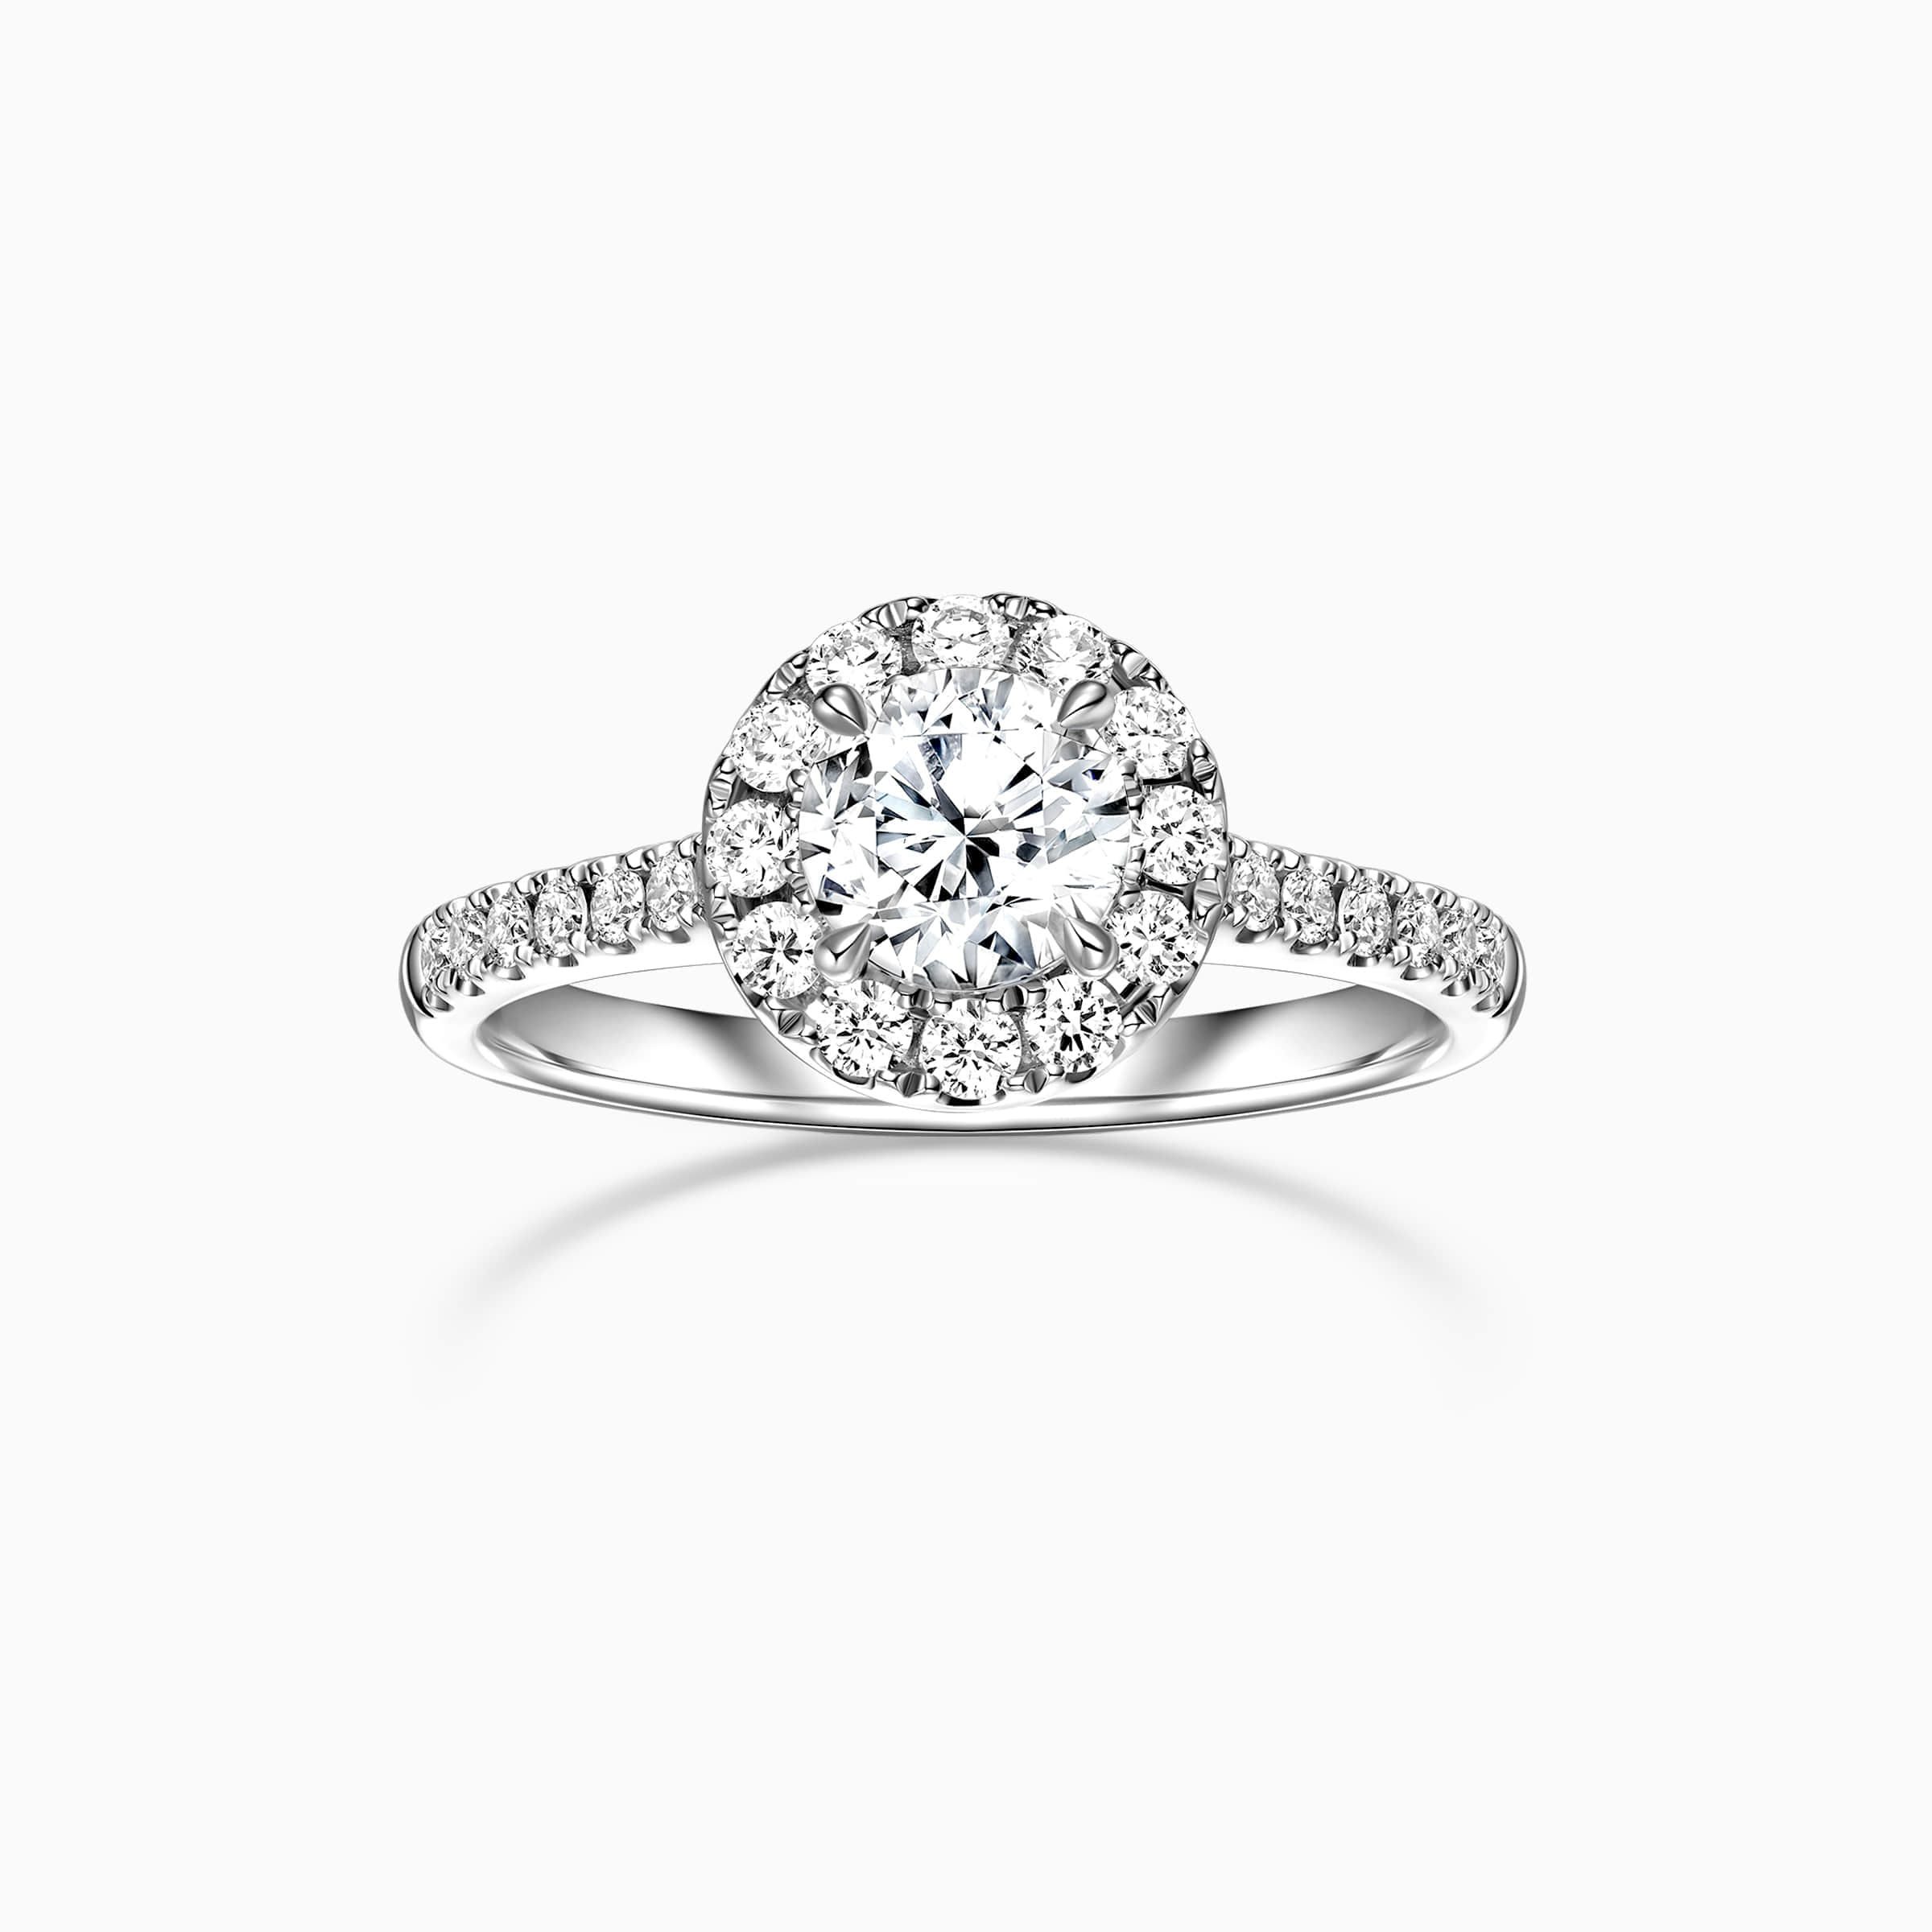 Darry Ring round halo promise ring white gold